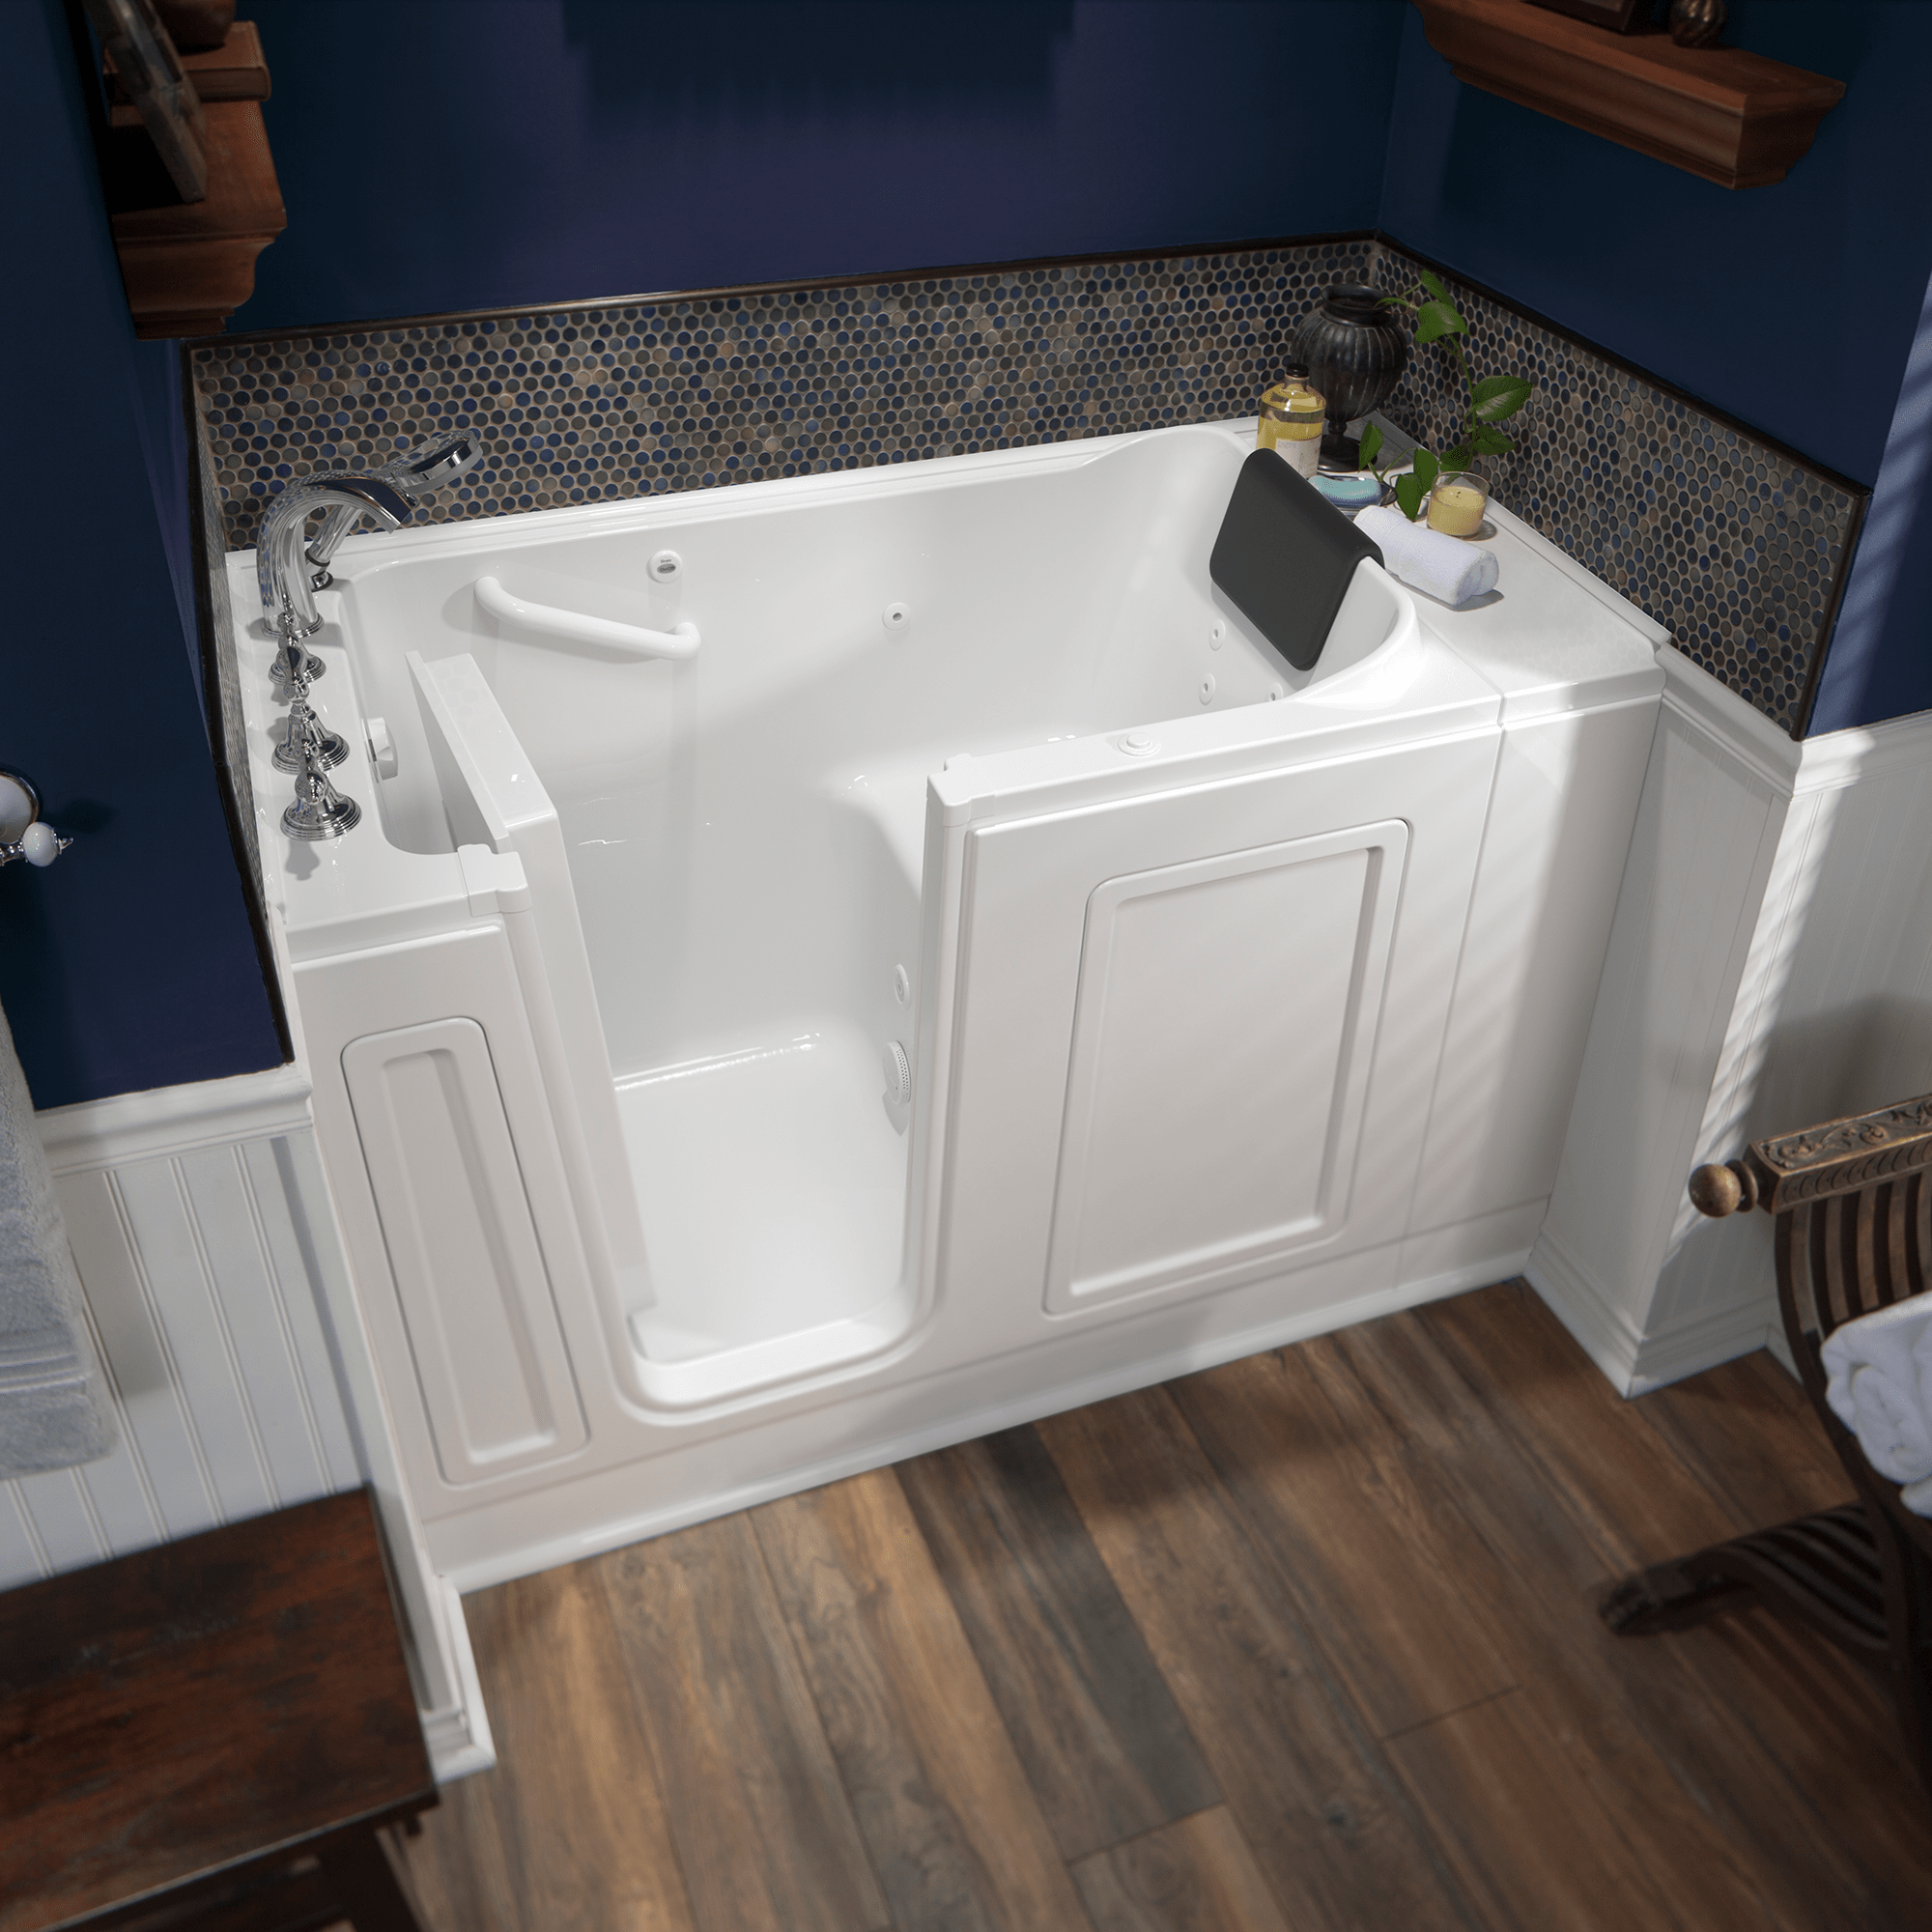 Acrylic Luxury Series 30 x 51 -Inch Walk-in Tub With Whirlpool System - Left-Hand Drain With Faucet